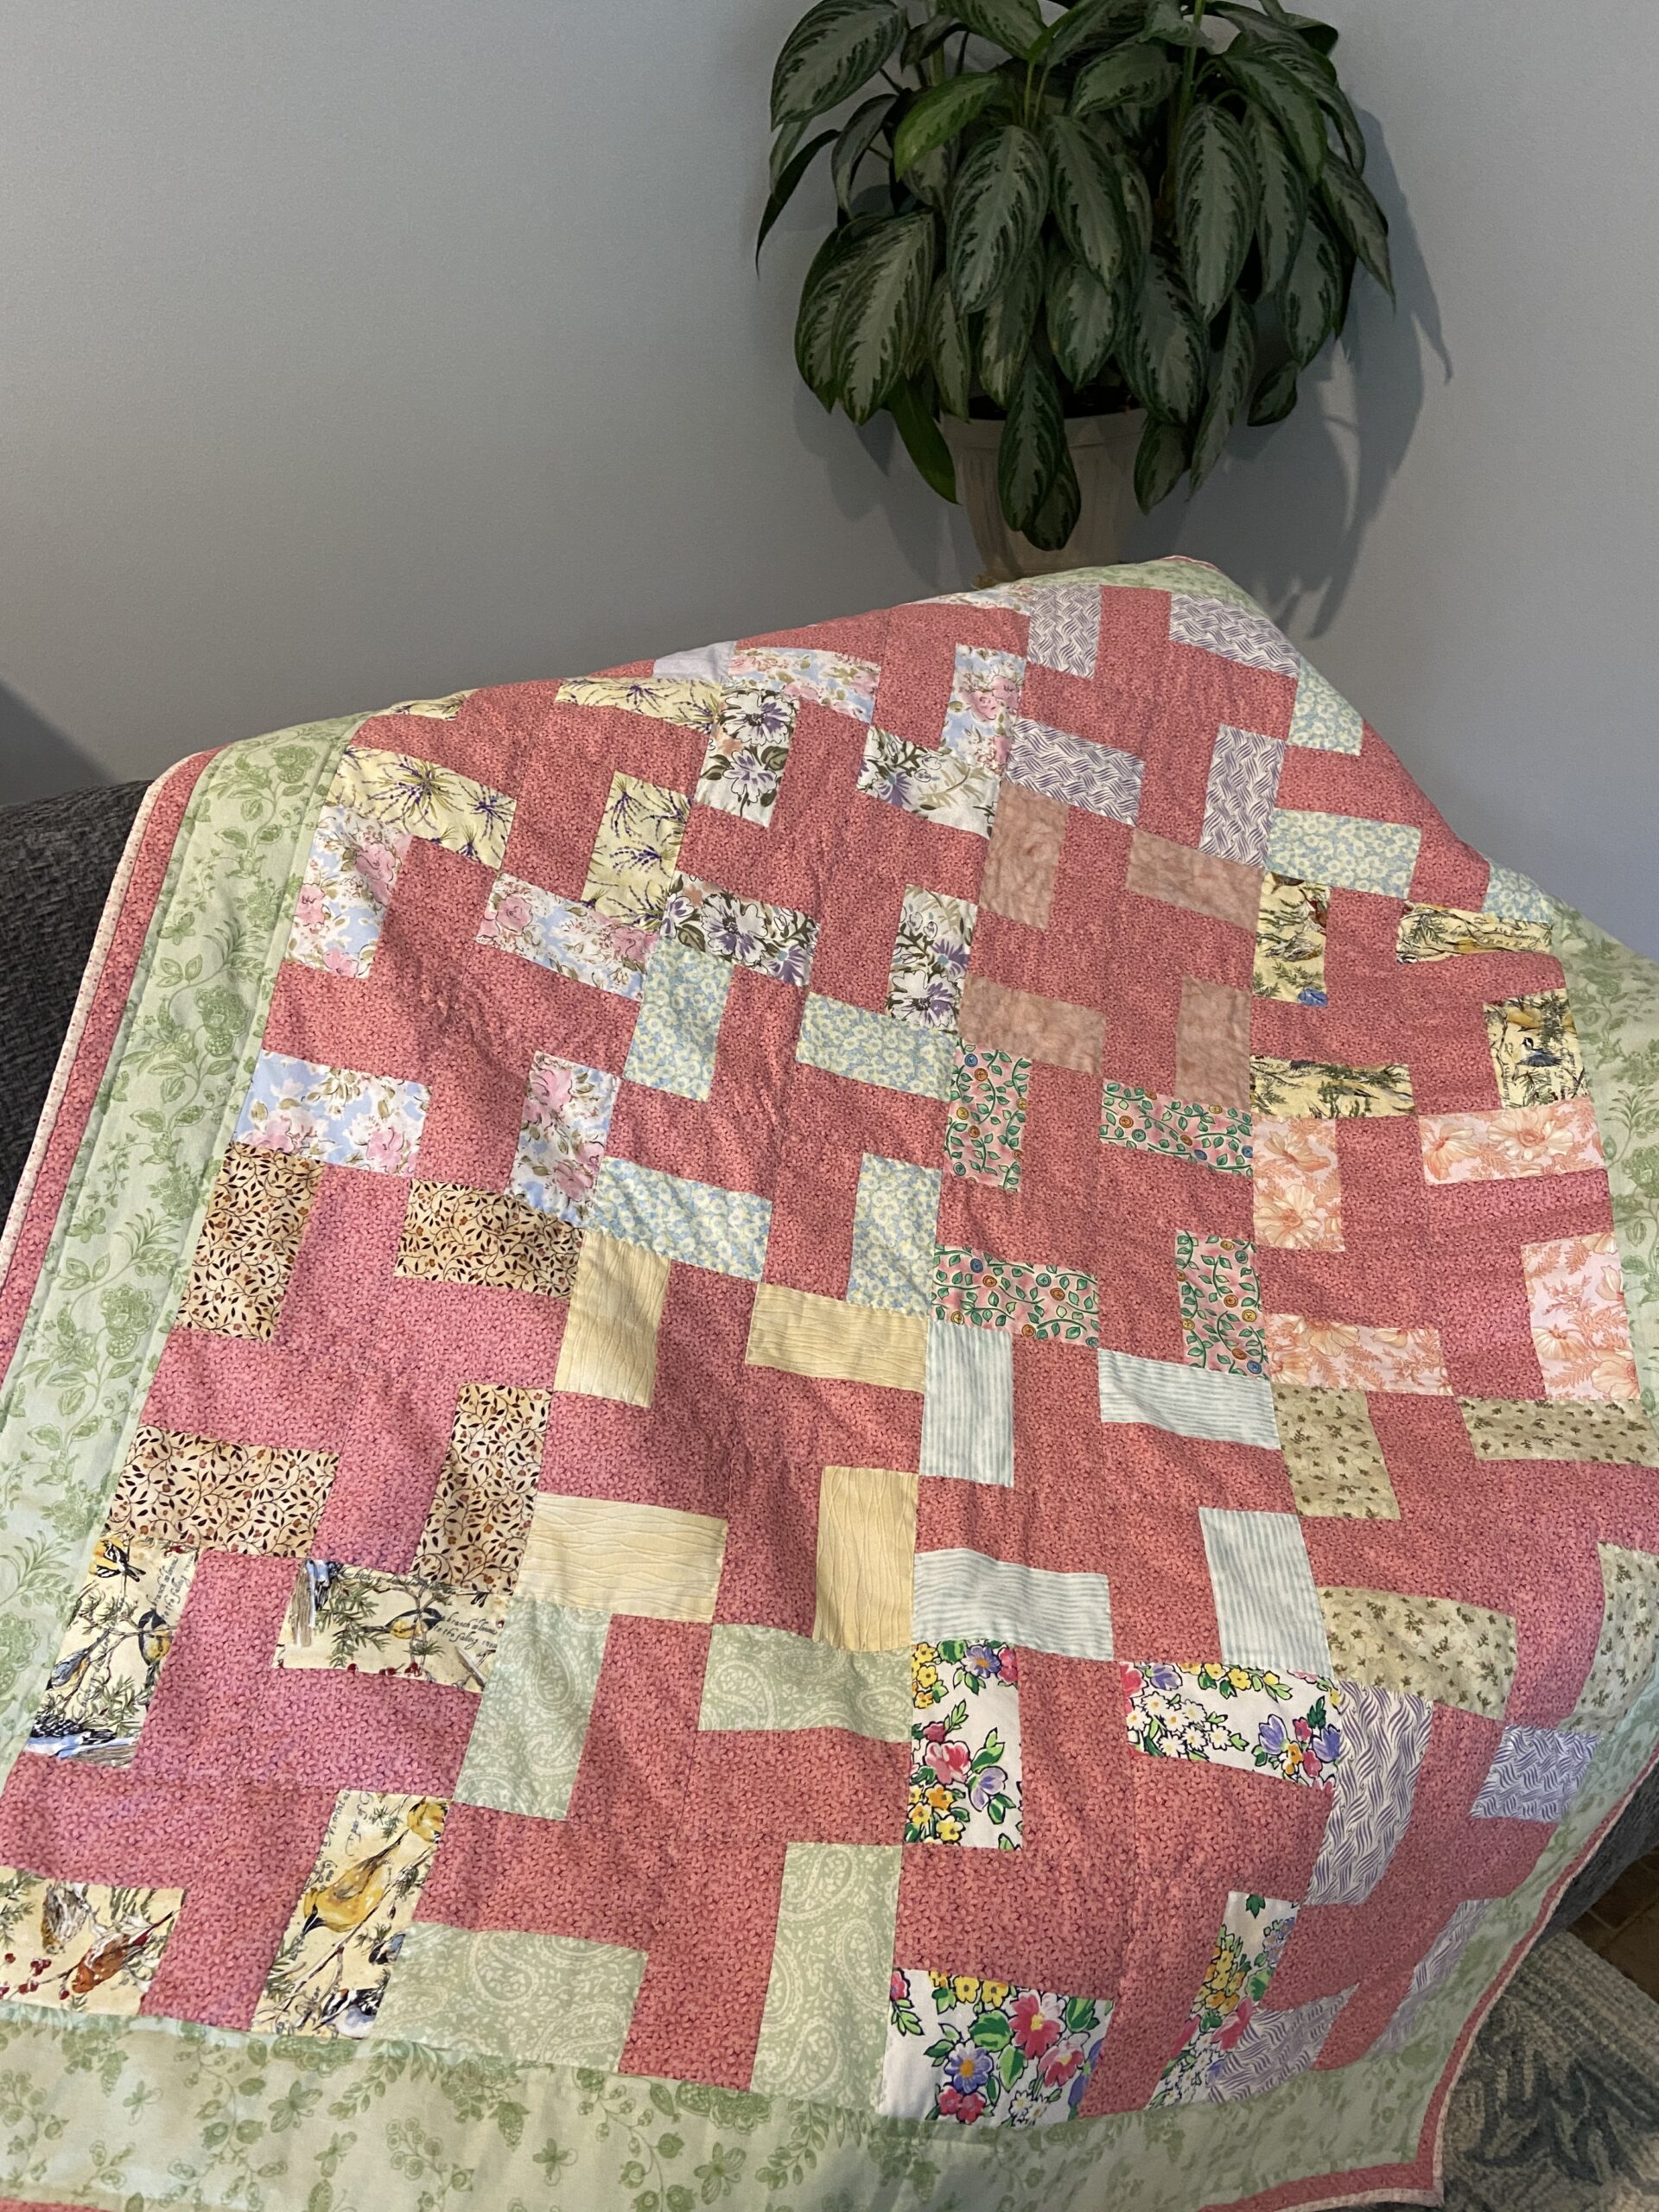 Wendy's Quilts and More: Hand quilting threads